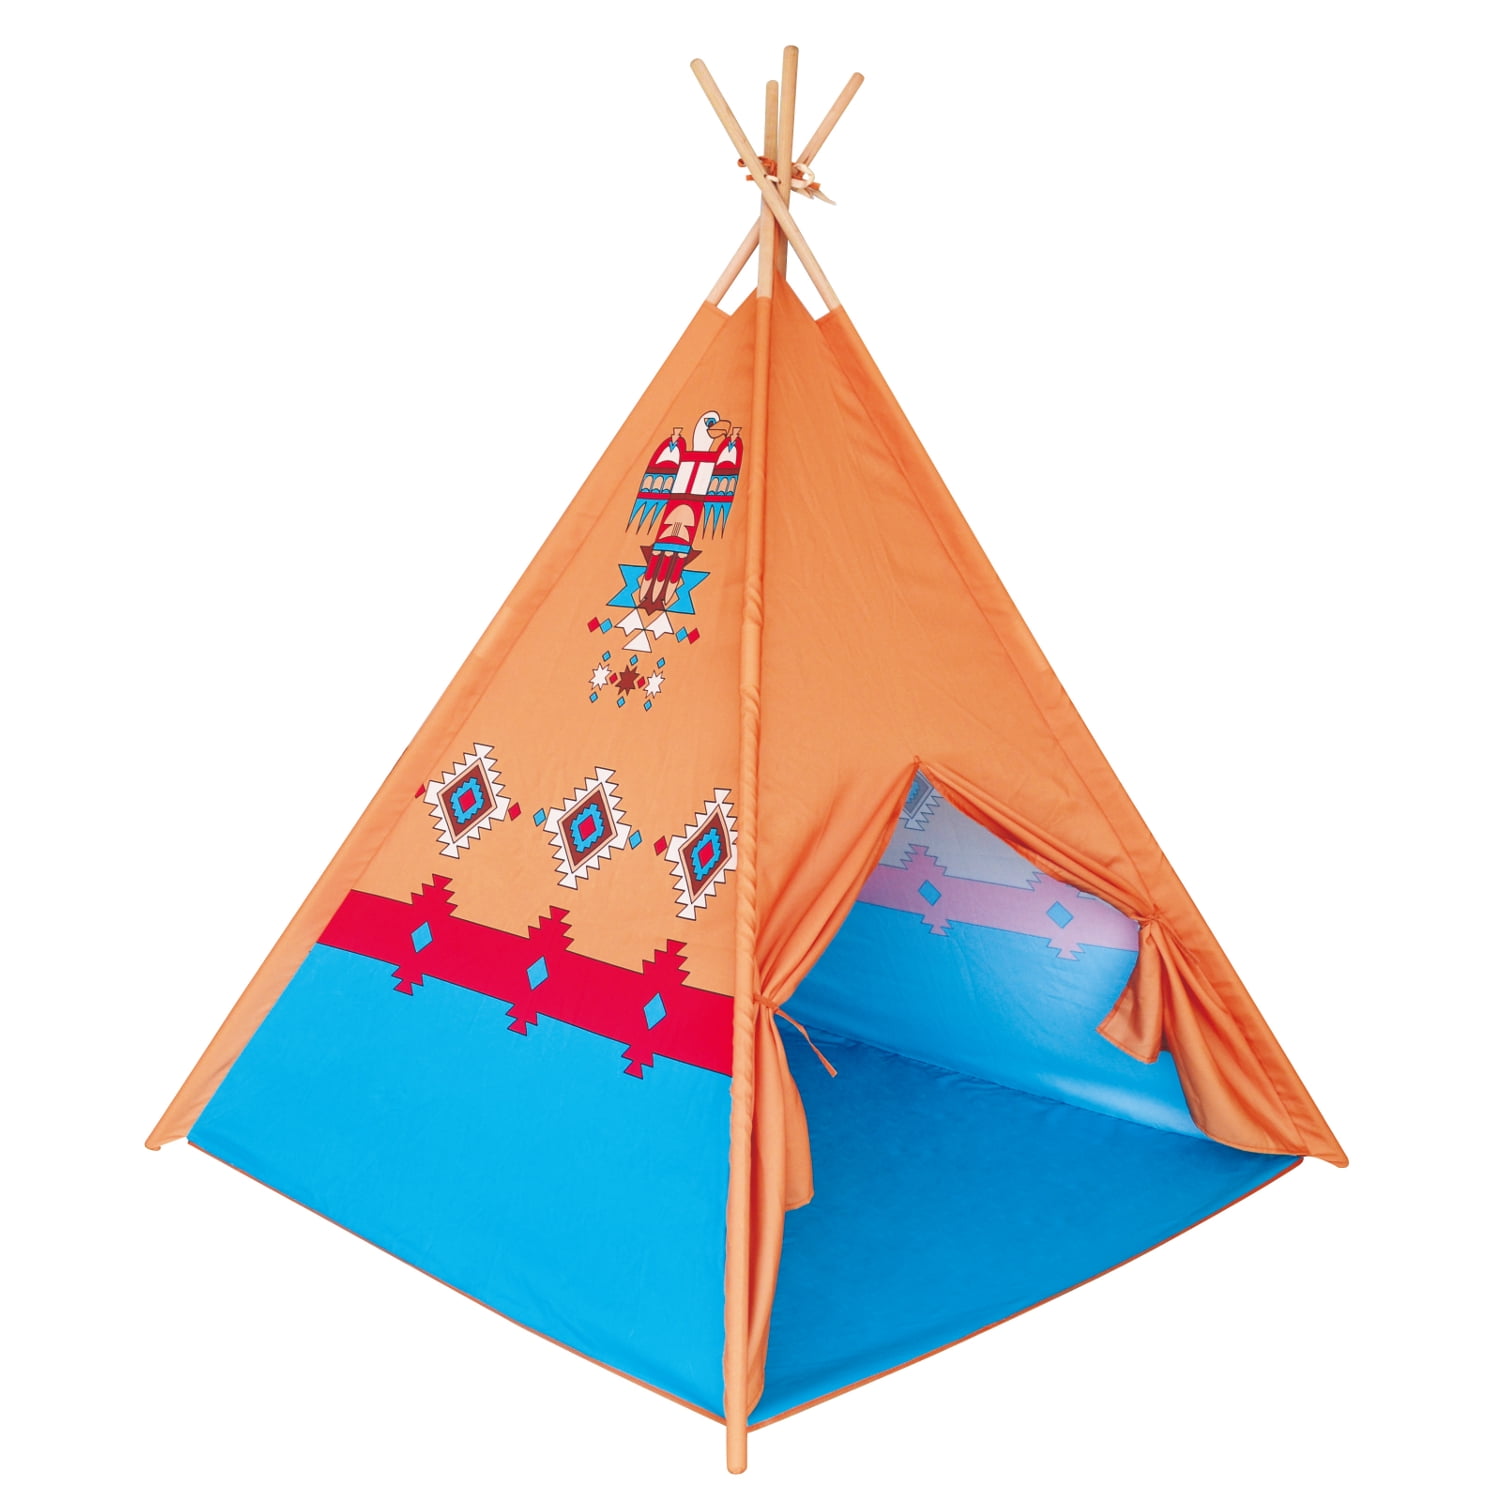 Teepee Indian Tent Kids Pop Up Play Tent Ball Pit Playhouse Indoor Outdoor Gift 